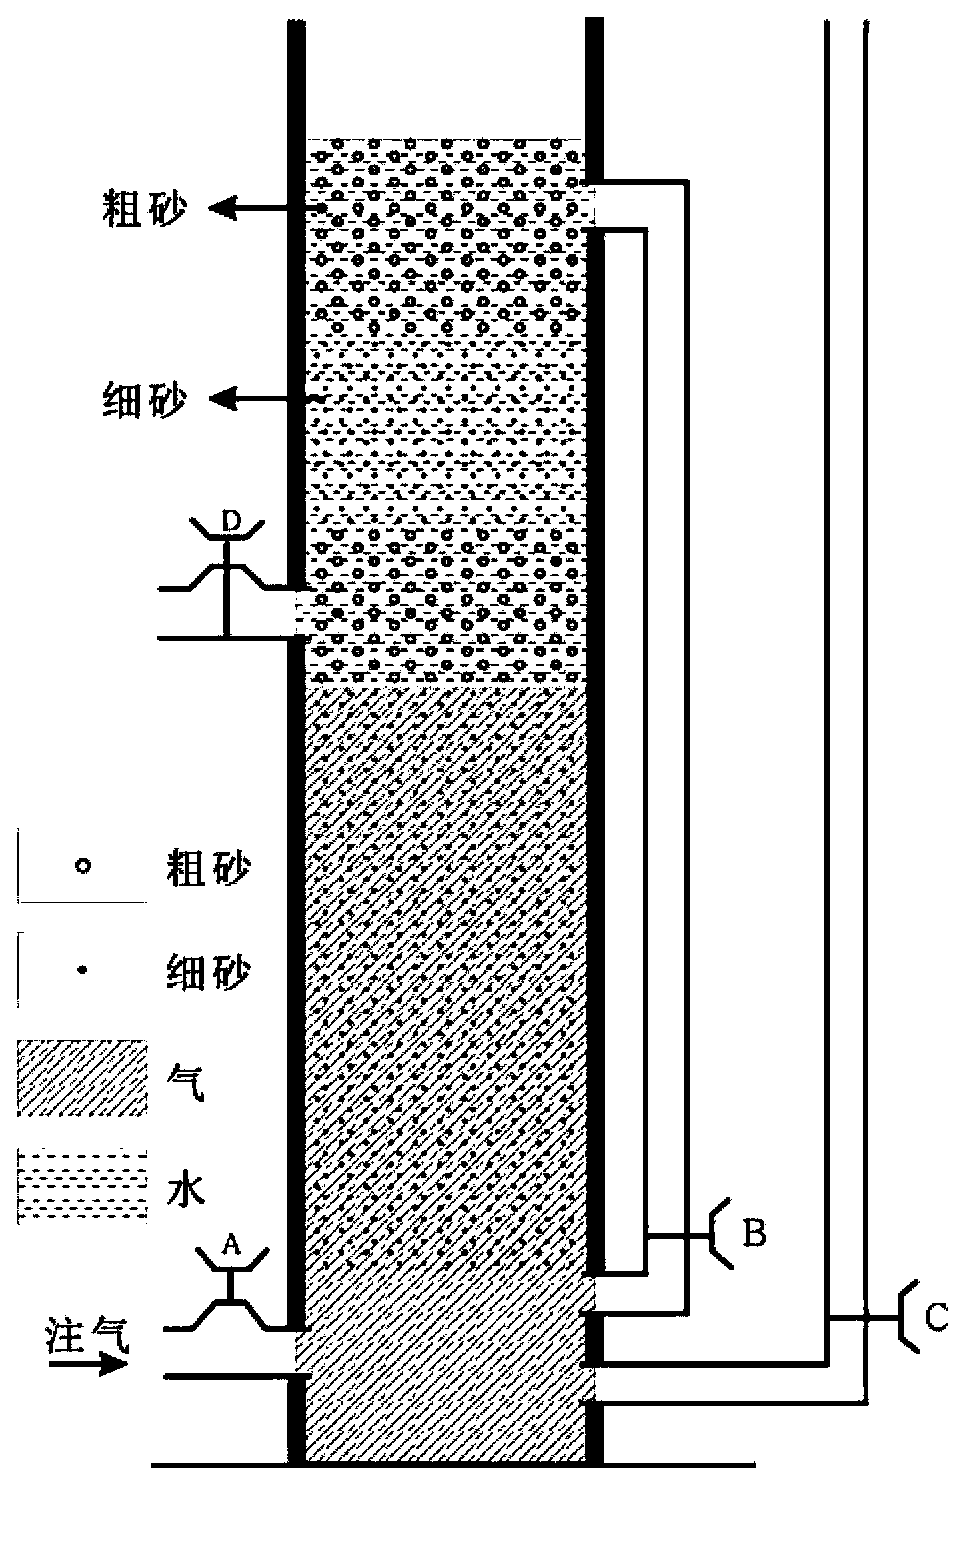 Physical simulation experiment device and method for determining buoyancy lower limit and power balance